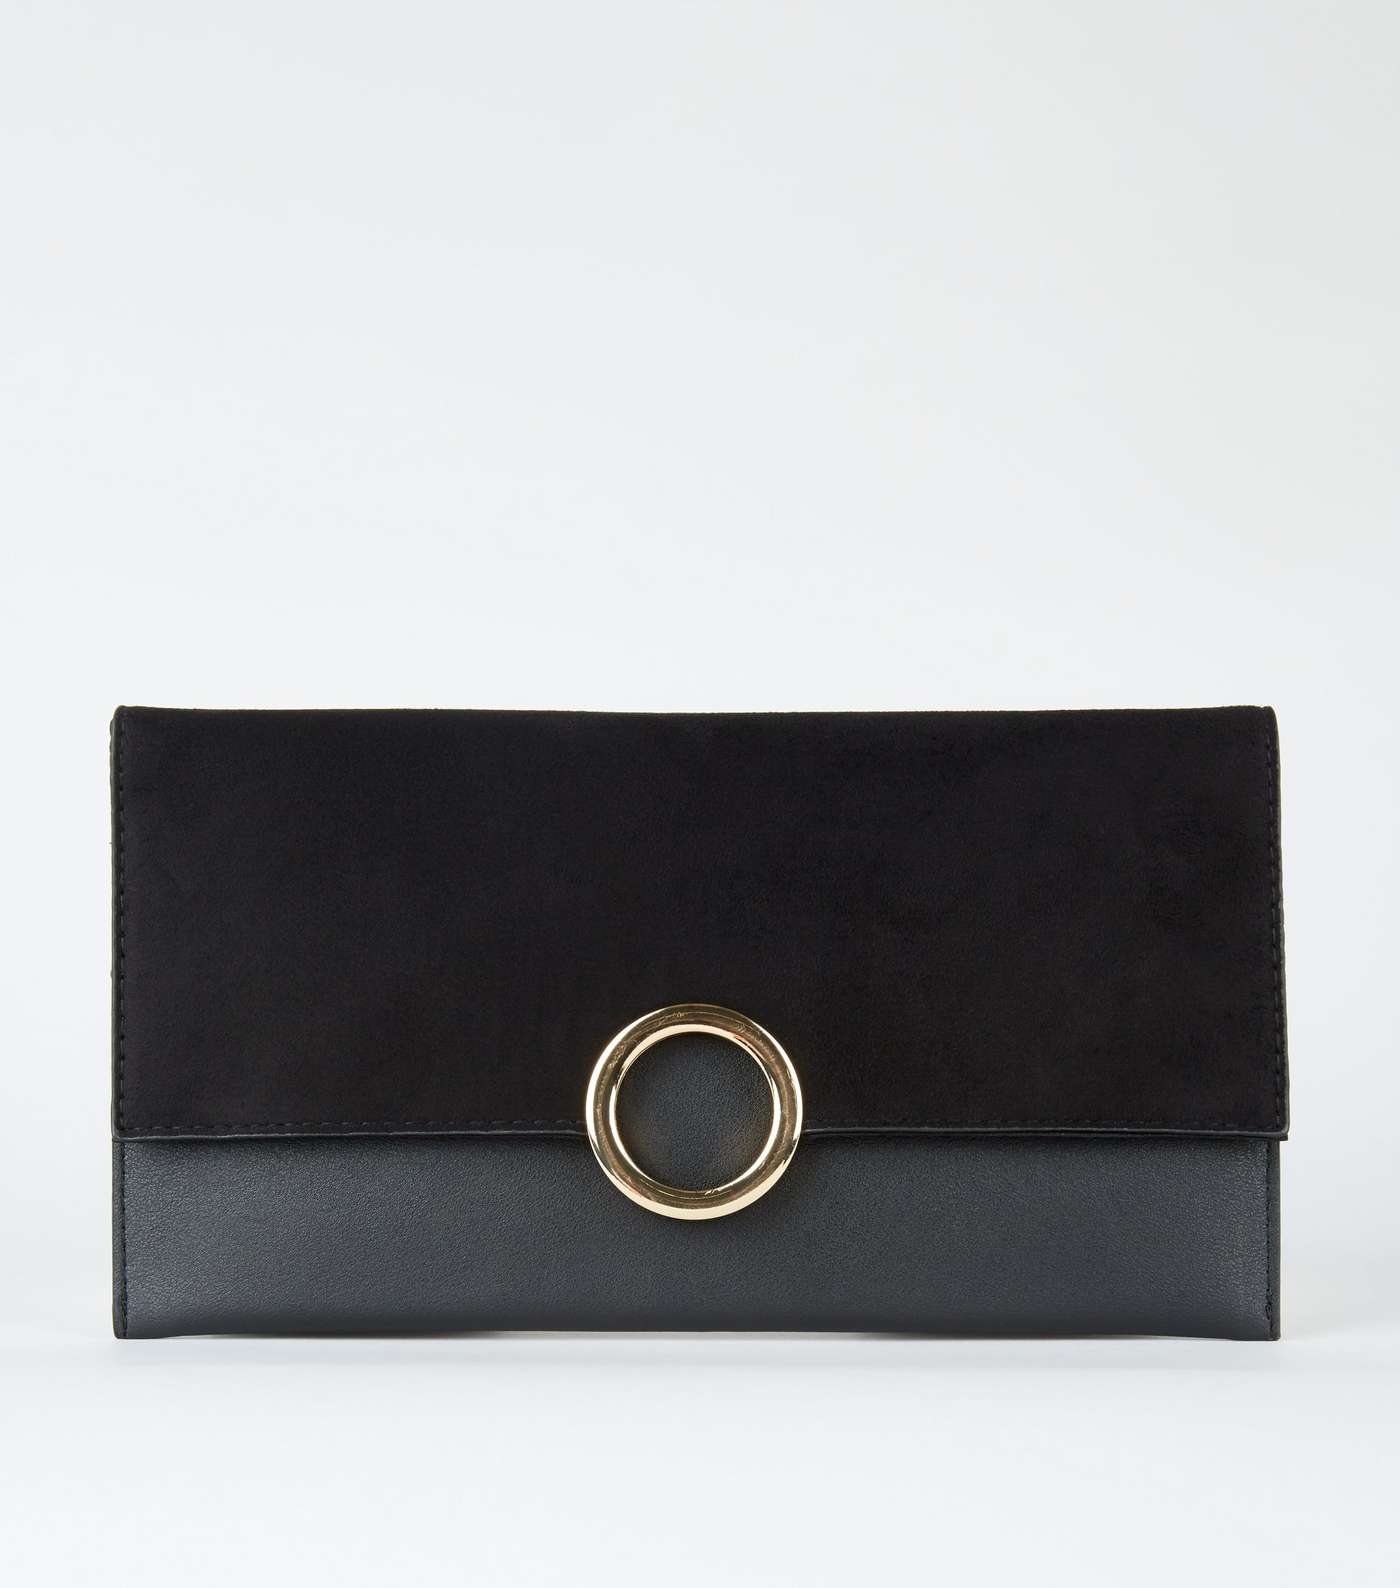 Black Leather-Look Ring Front Clutch